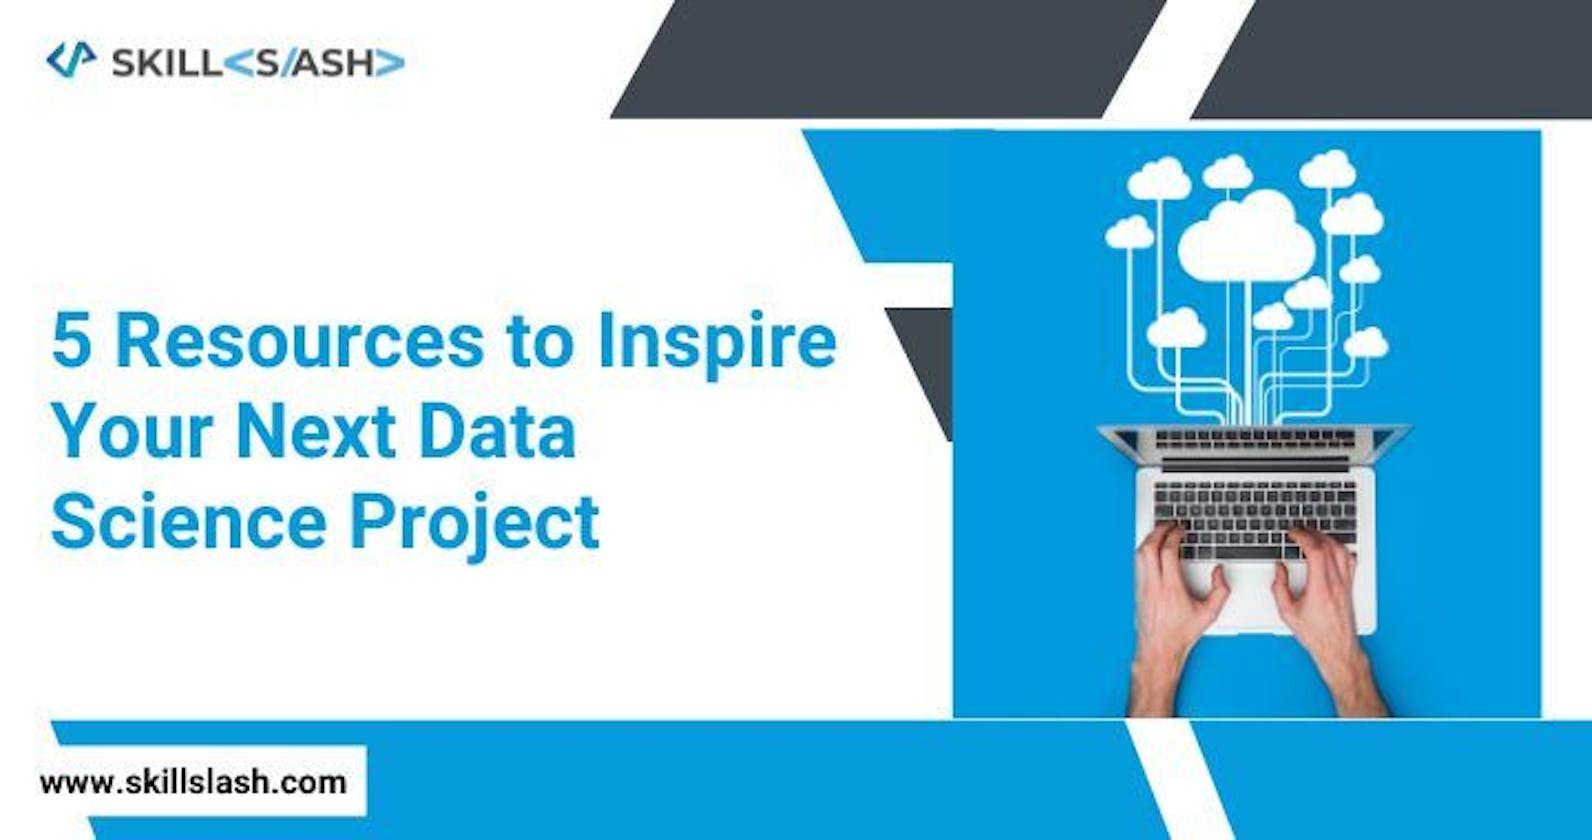 5 Resources to Inspire Your Next Data Science Project